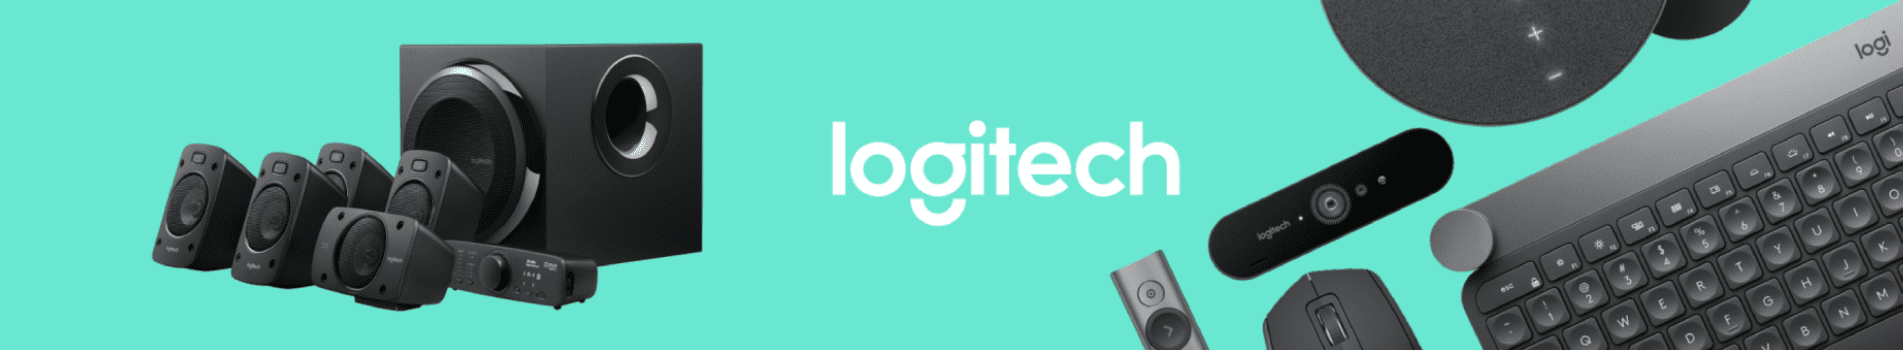 Buy Logitech Products @ best prices on tecneek !